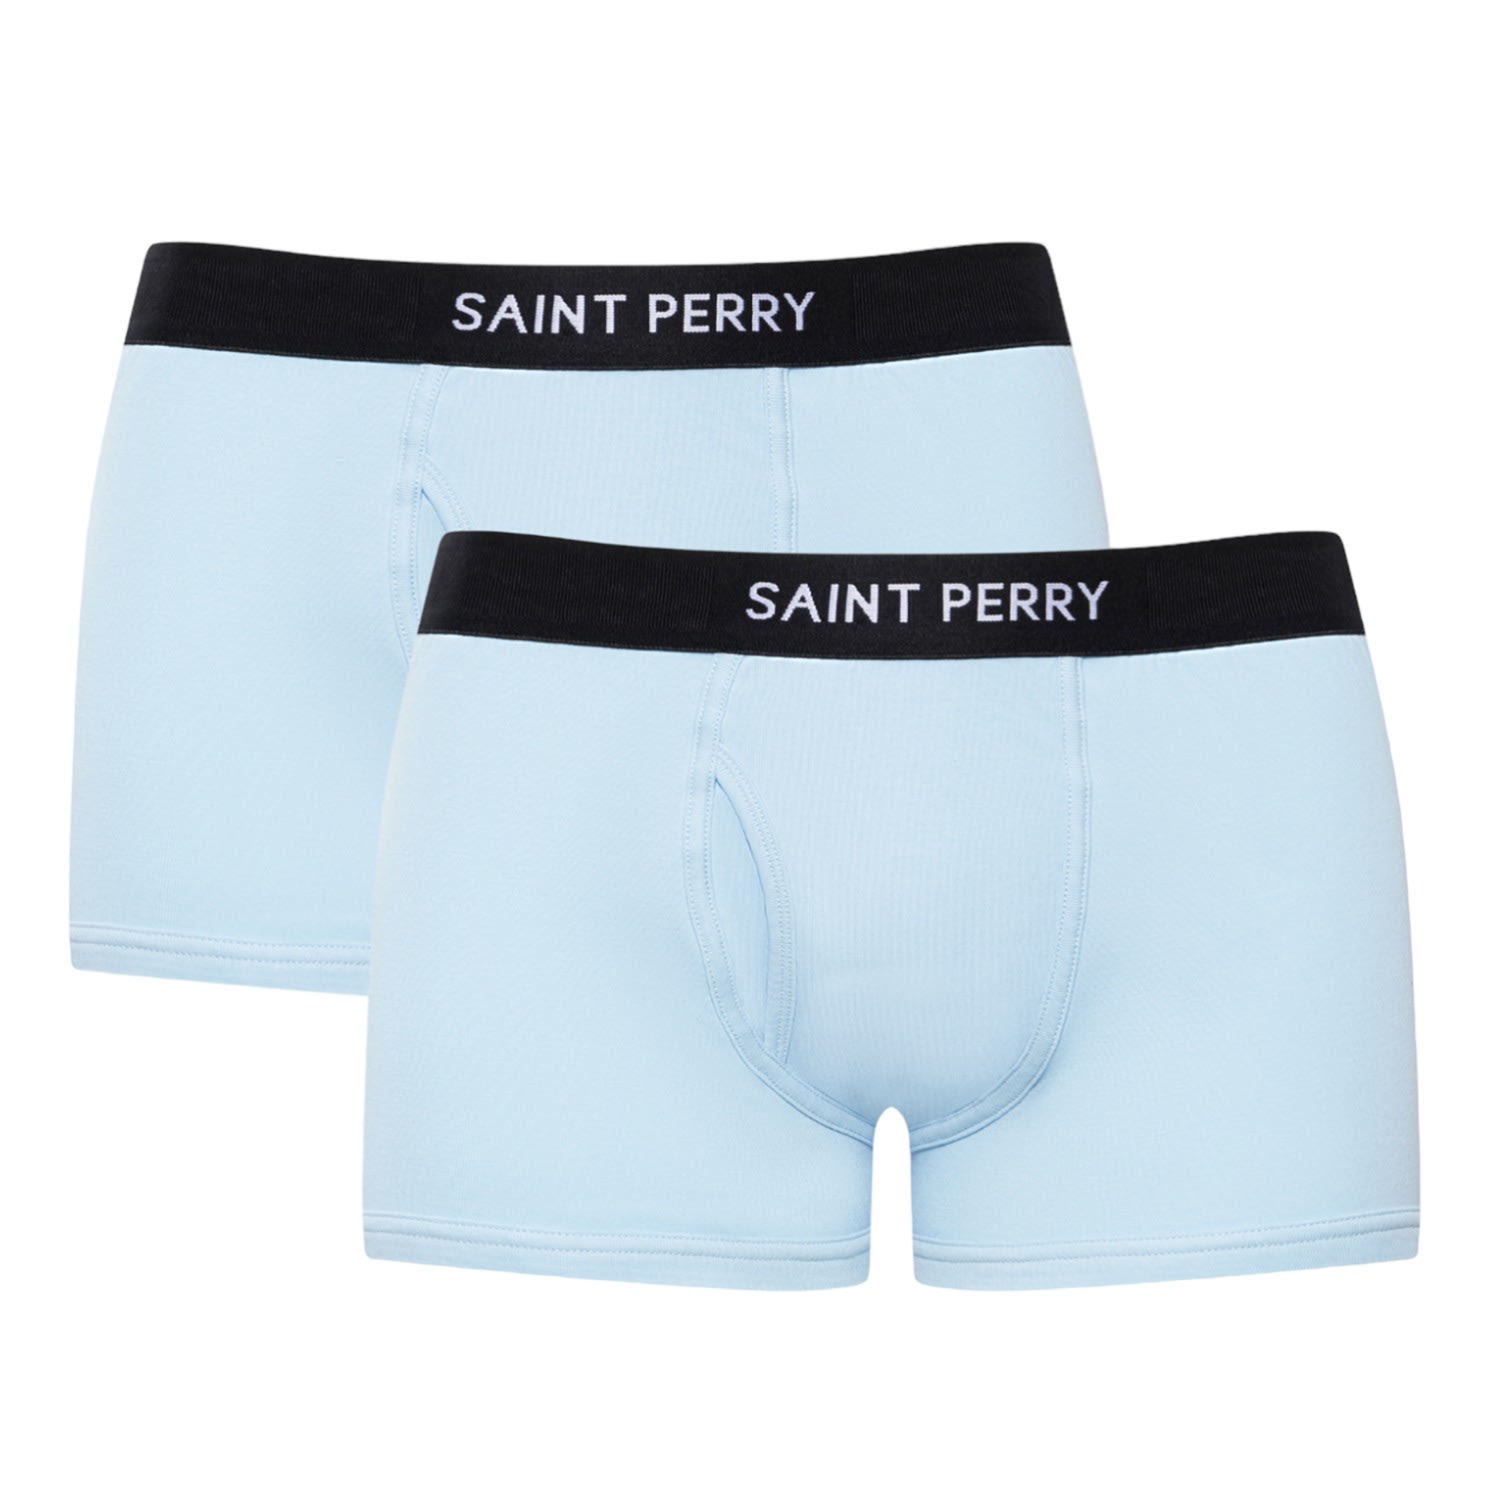 Men’s Cotton Boxer Brief Two Packs - Sky Blue Small Saint Perry